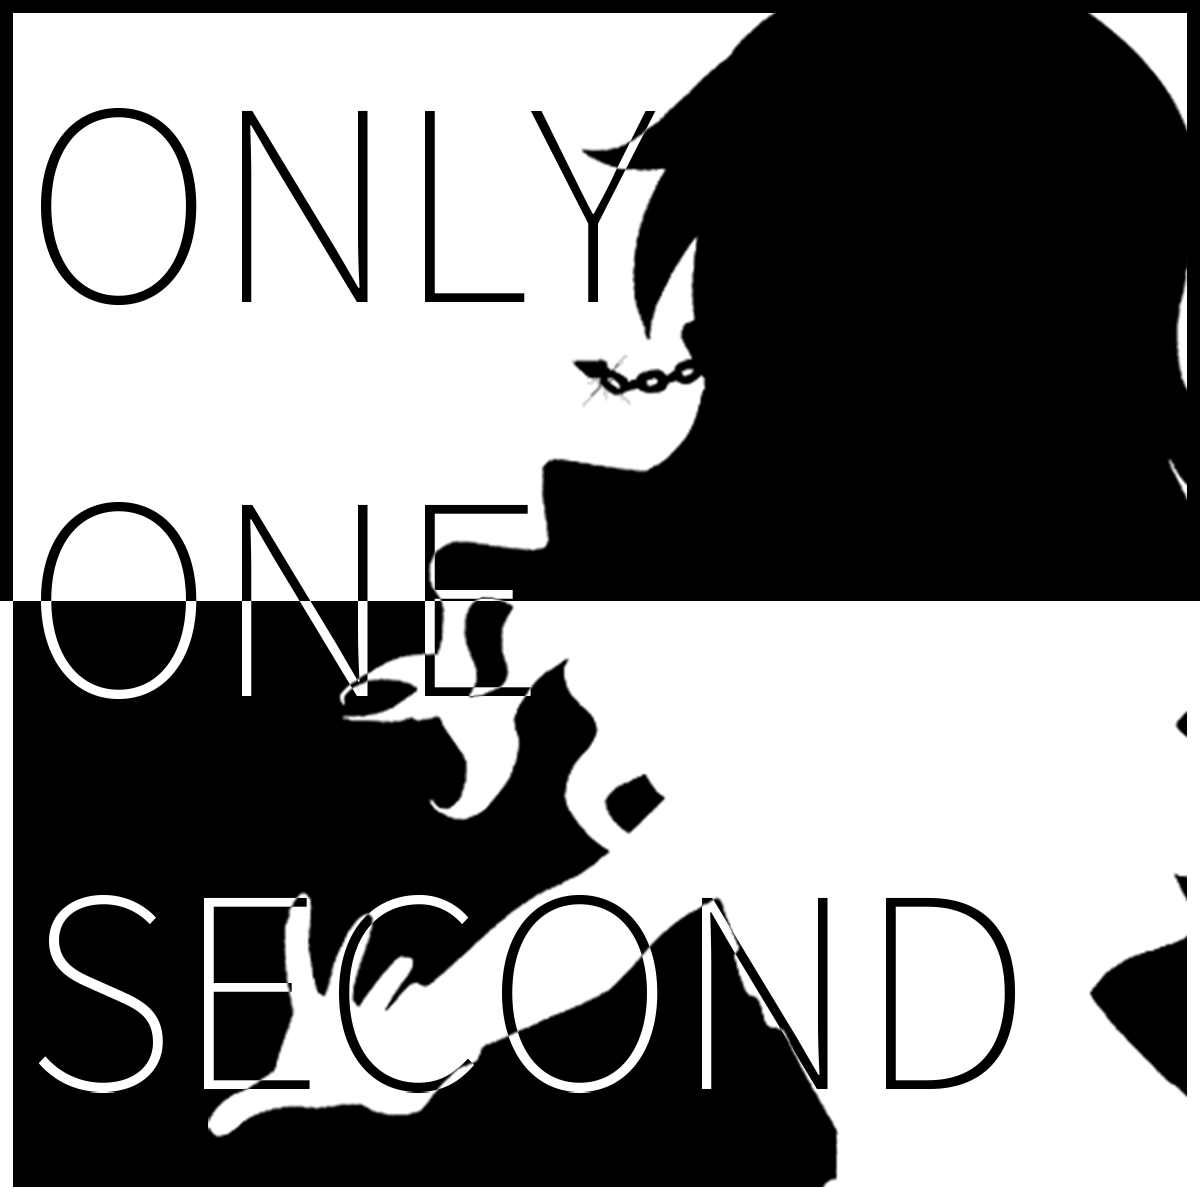 Only One Second!
https://t.co/CqfViy5fTV
#ミリシタ
#高山紗代子 